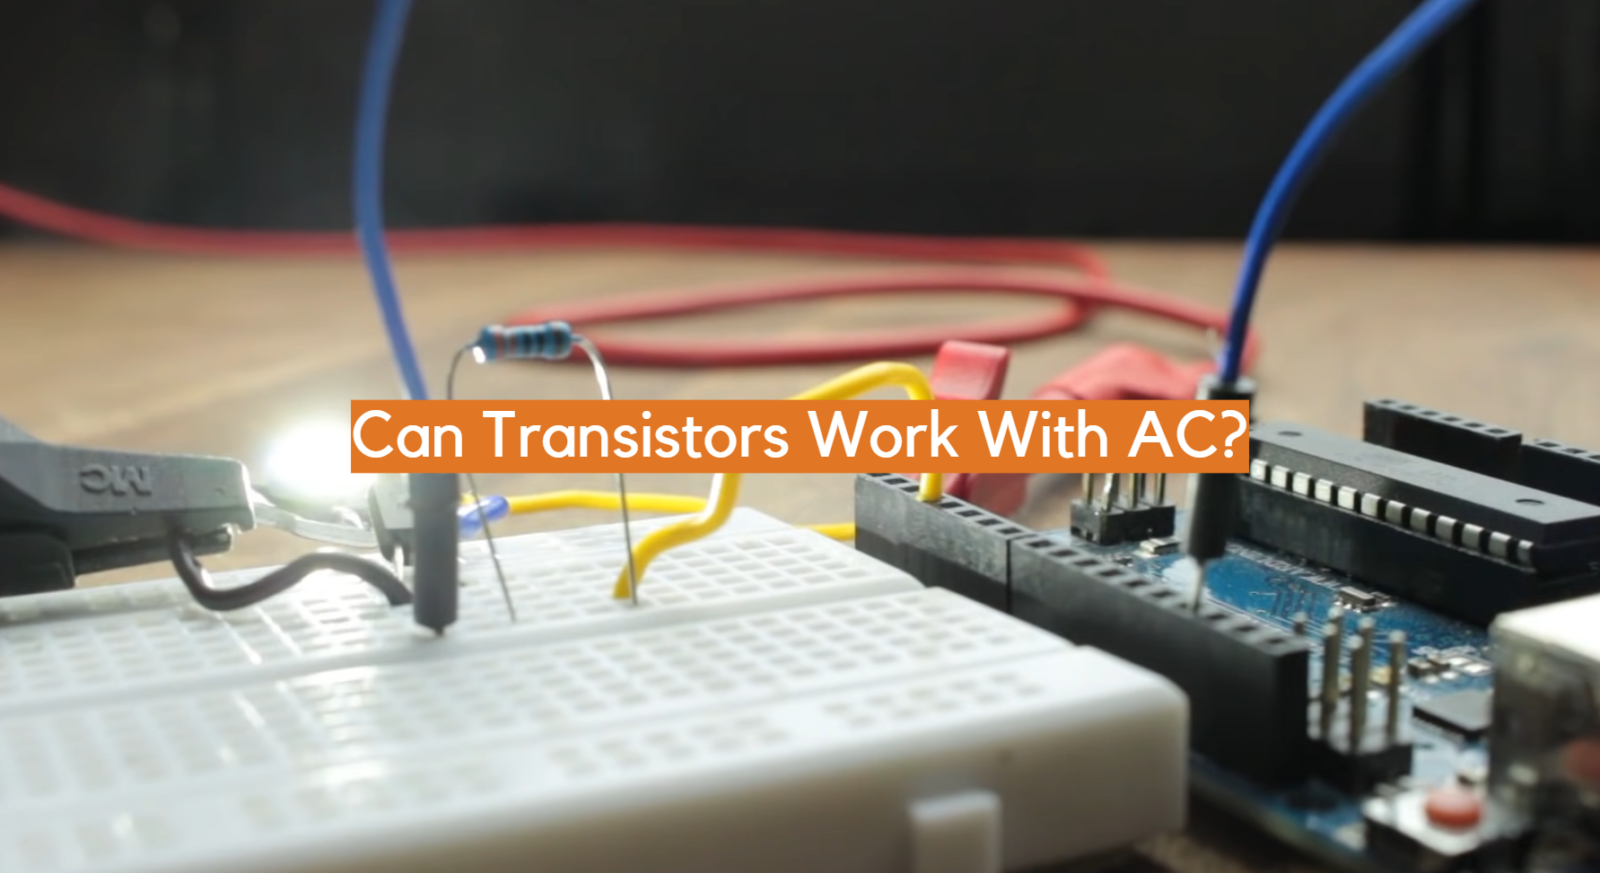 Can Transistors Work With AC?